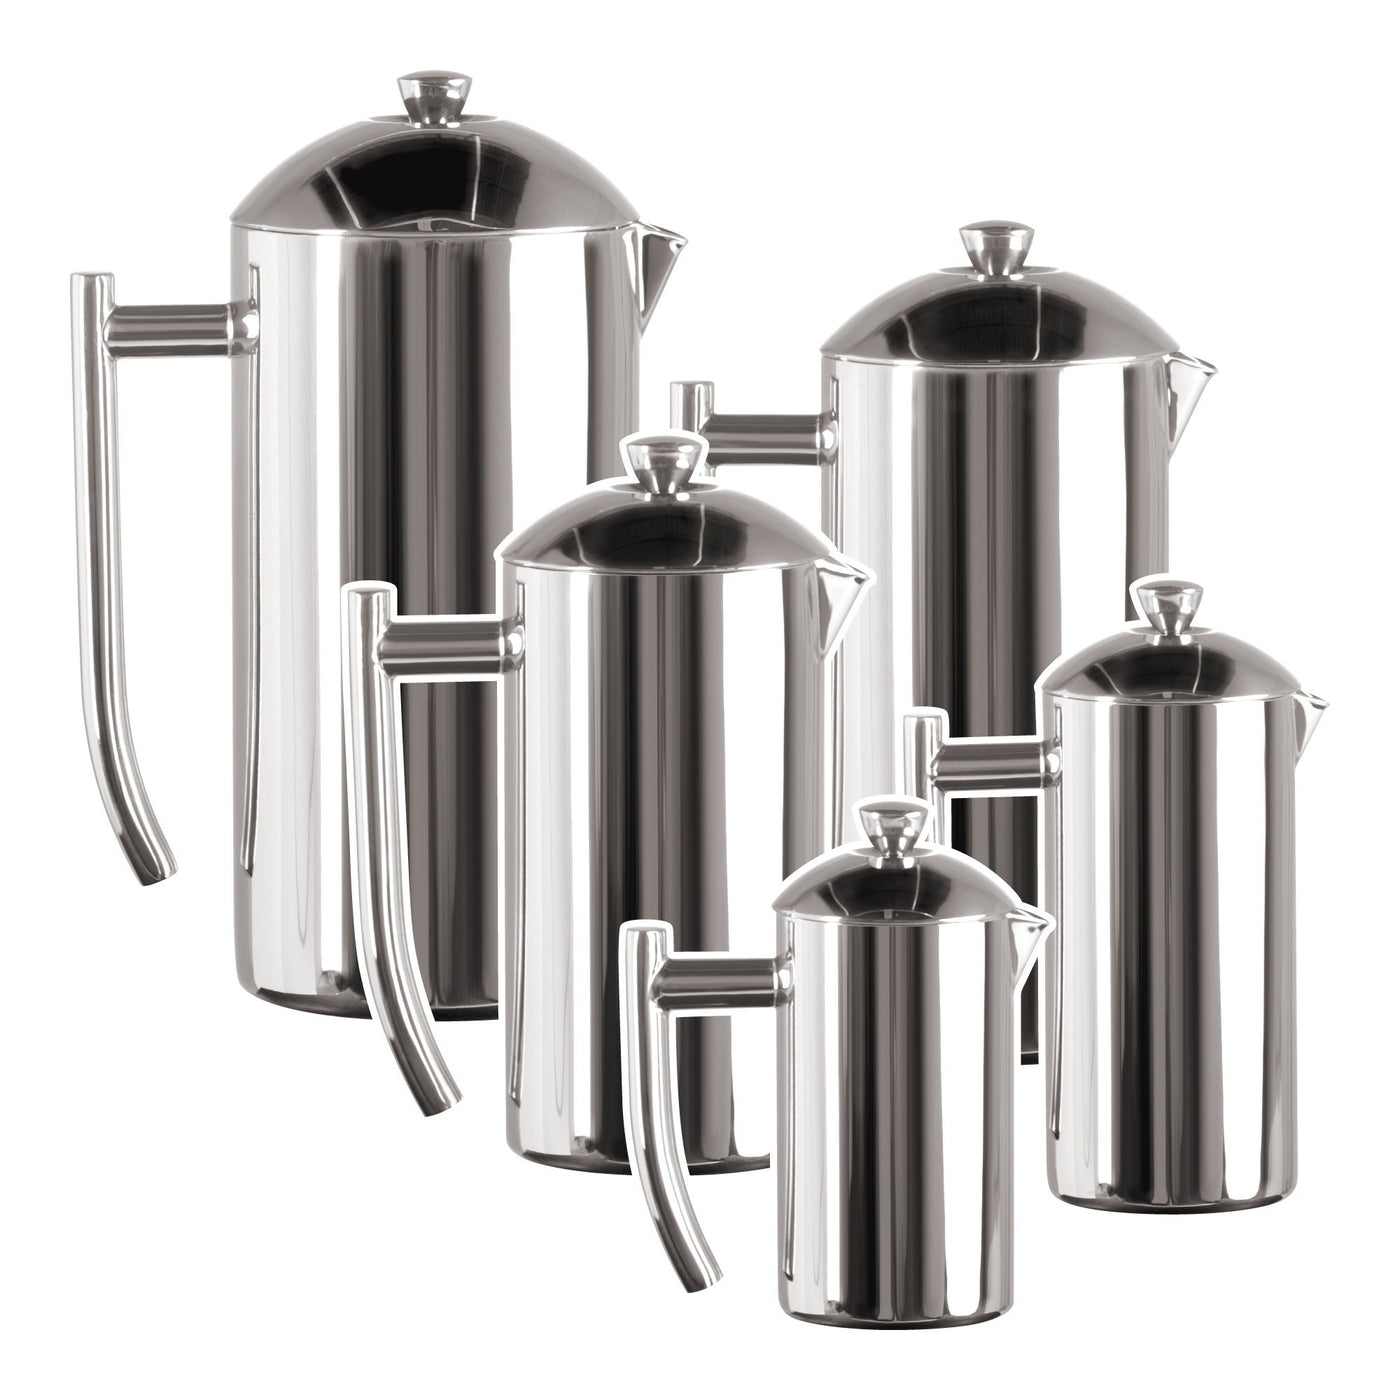 Bodum Columbia Double-Wall Stainless Steel French Press Coffee Maker, Silver, 17 oz